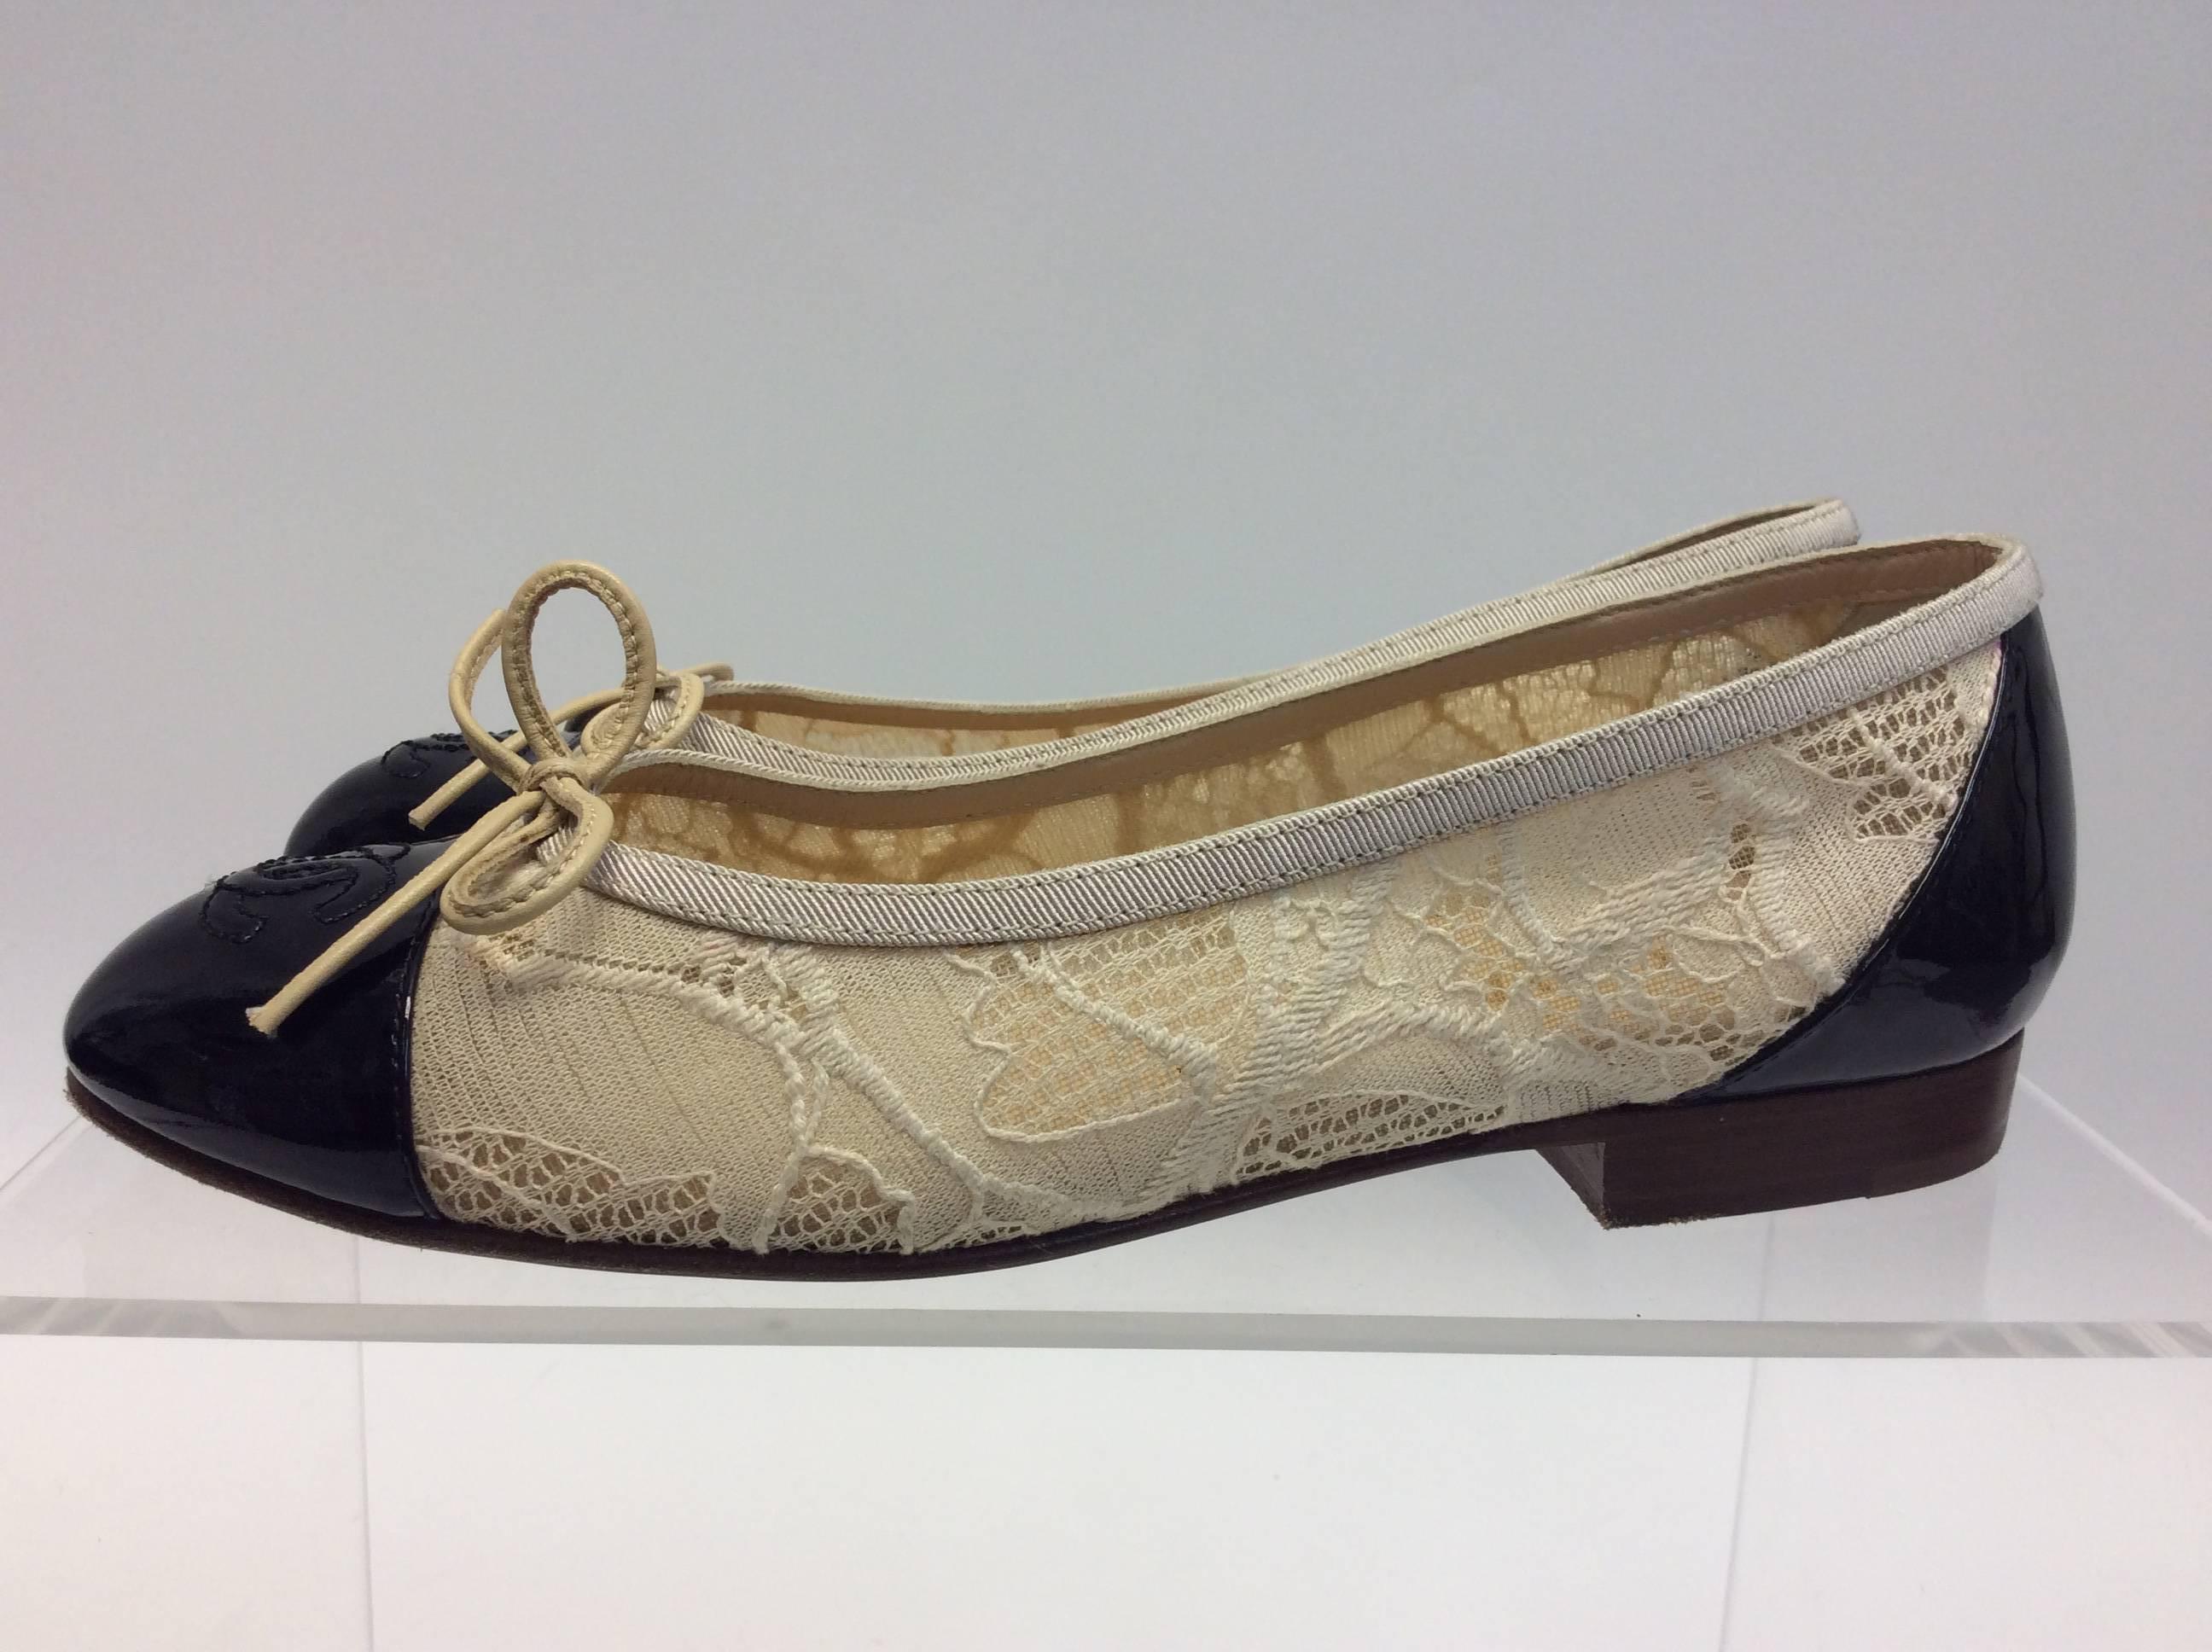 Chanel Cream Lace Flats
$299
Made in Italy
Size 35